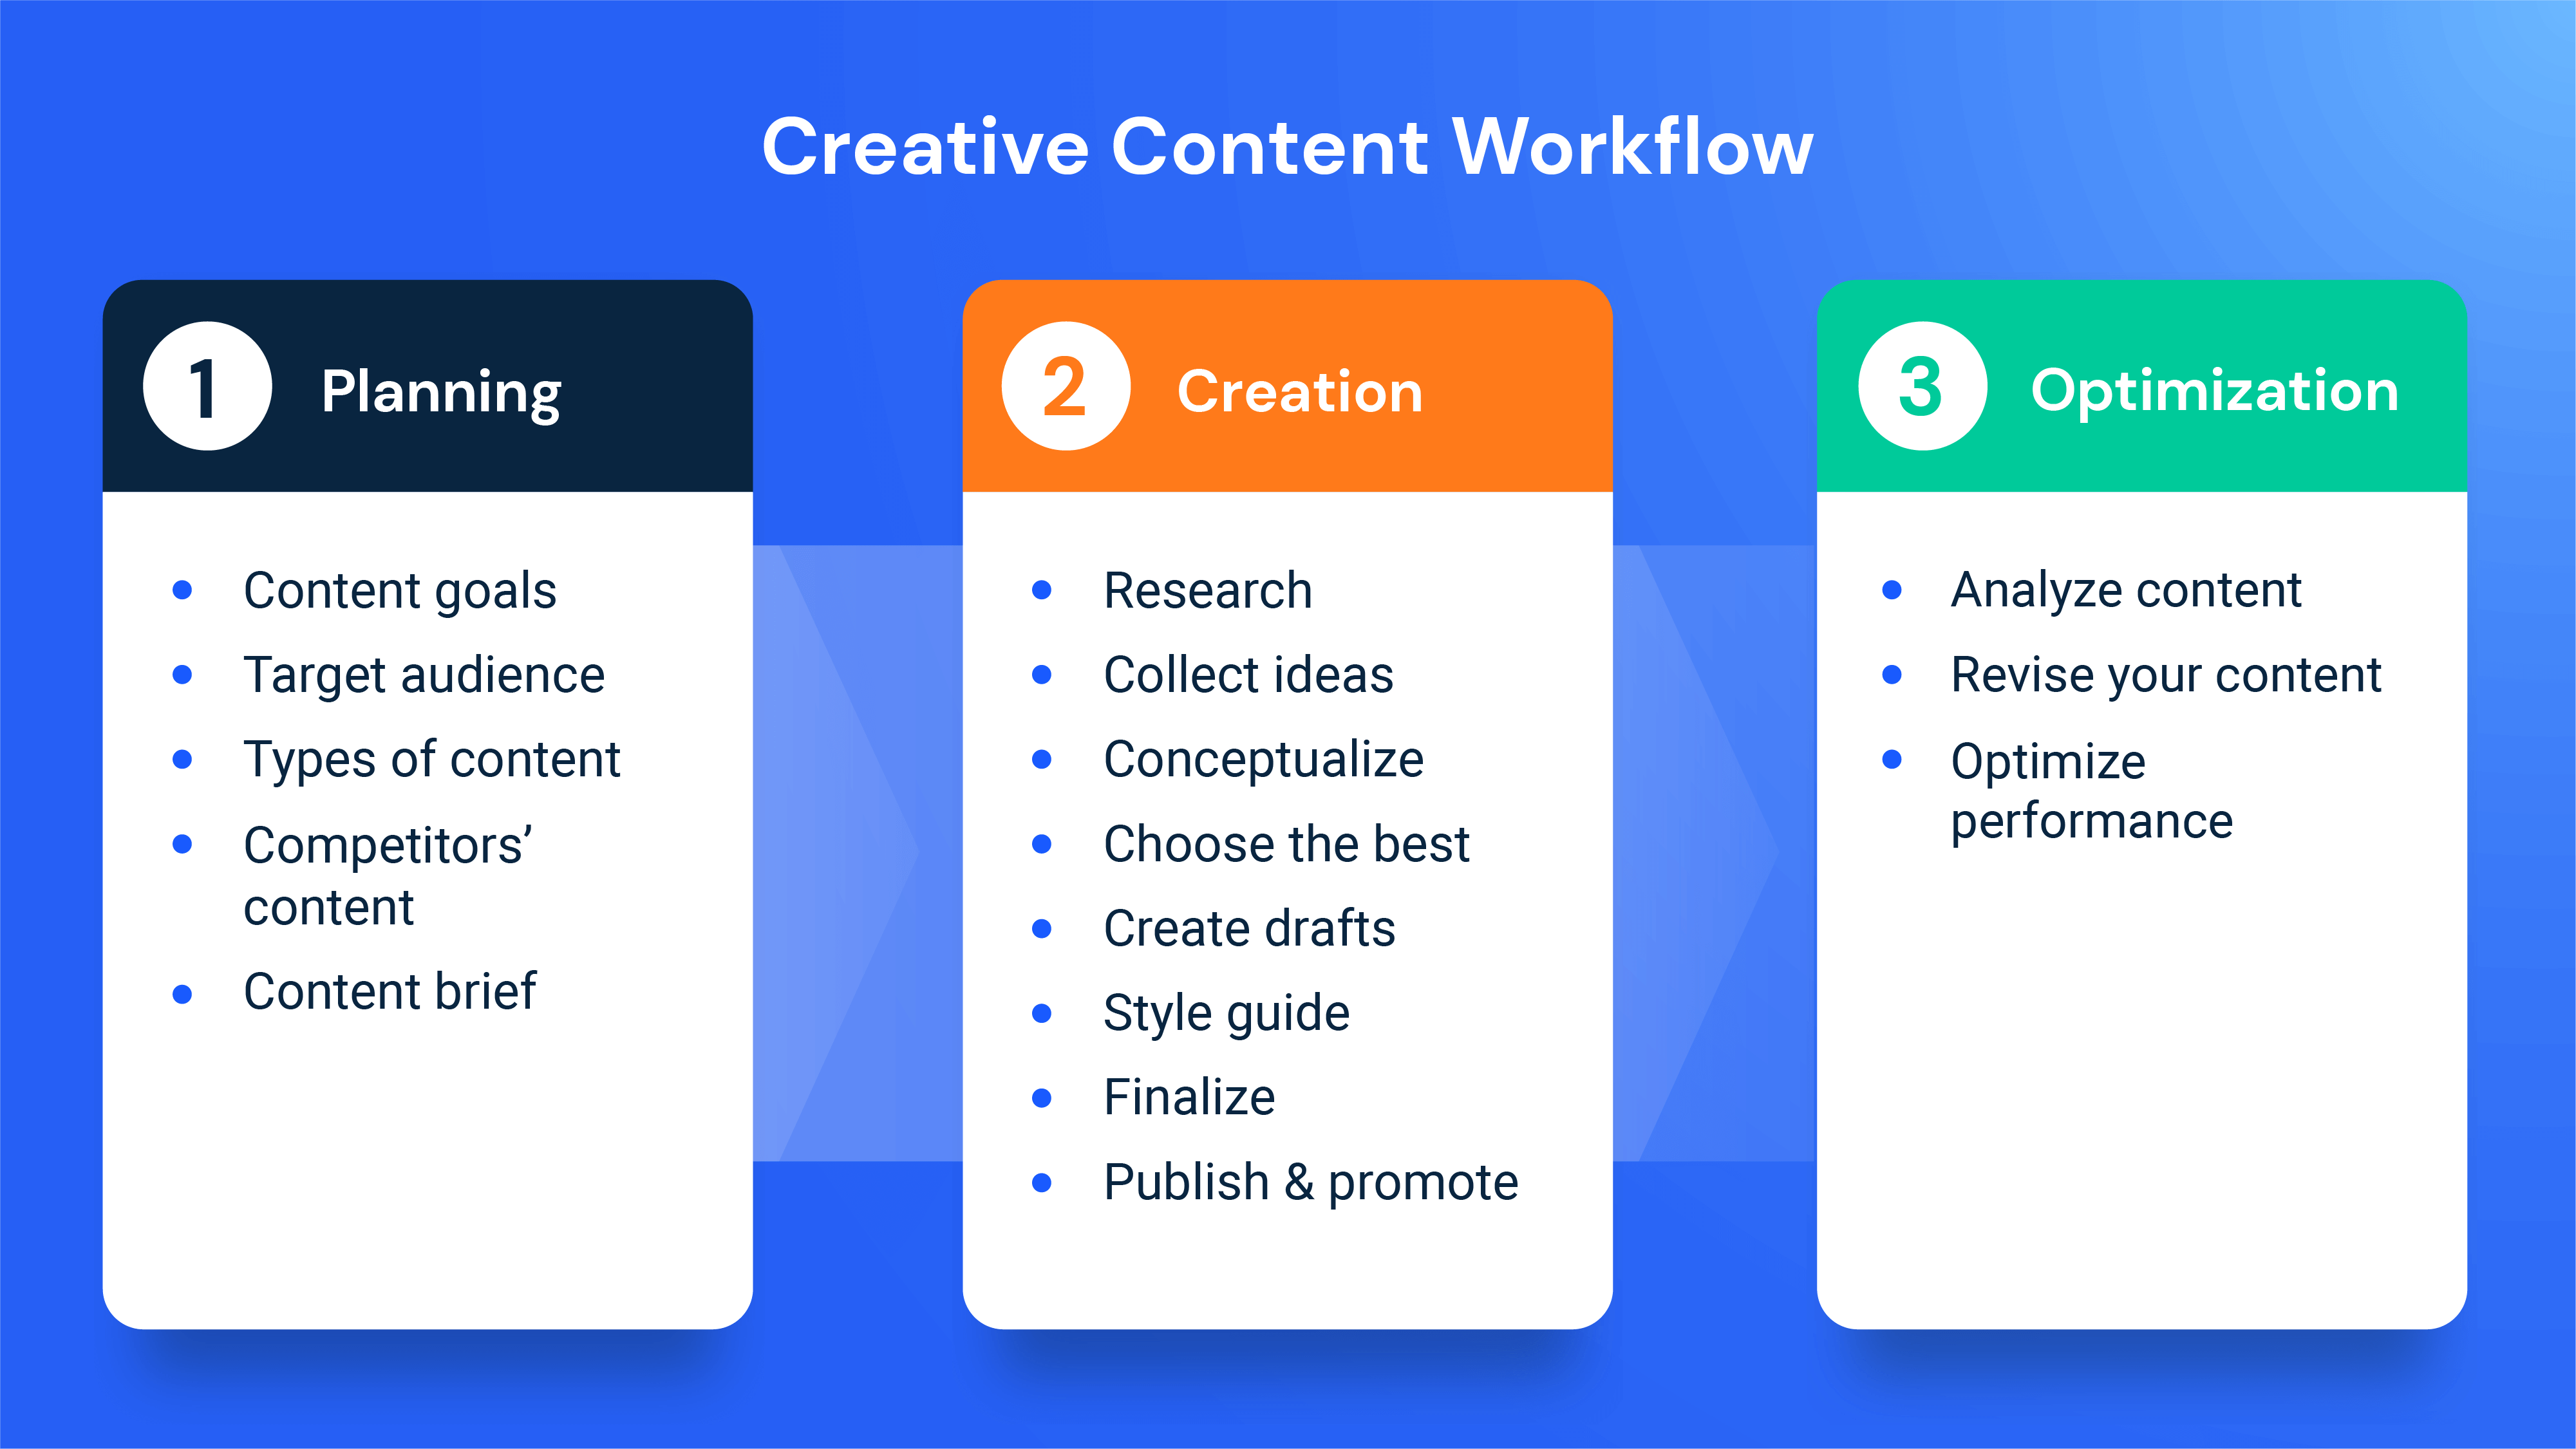 Grow your practice through content creation